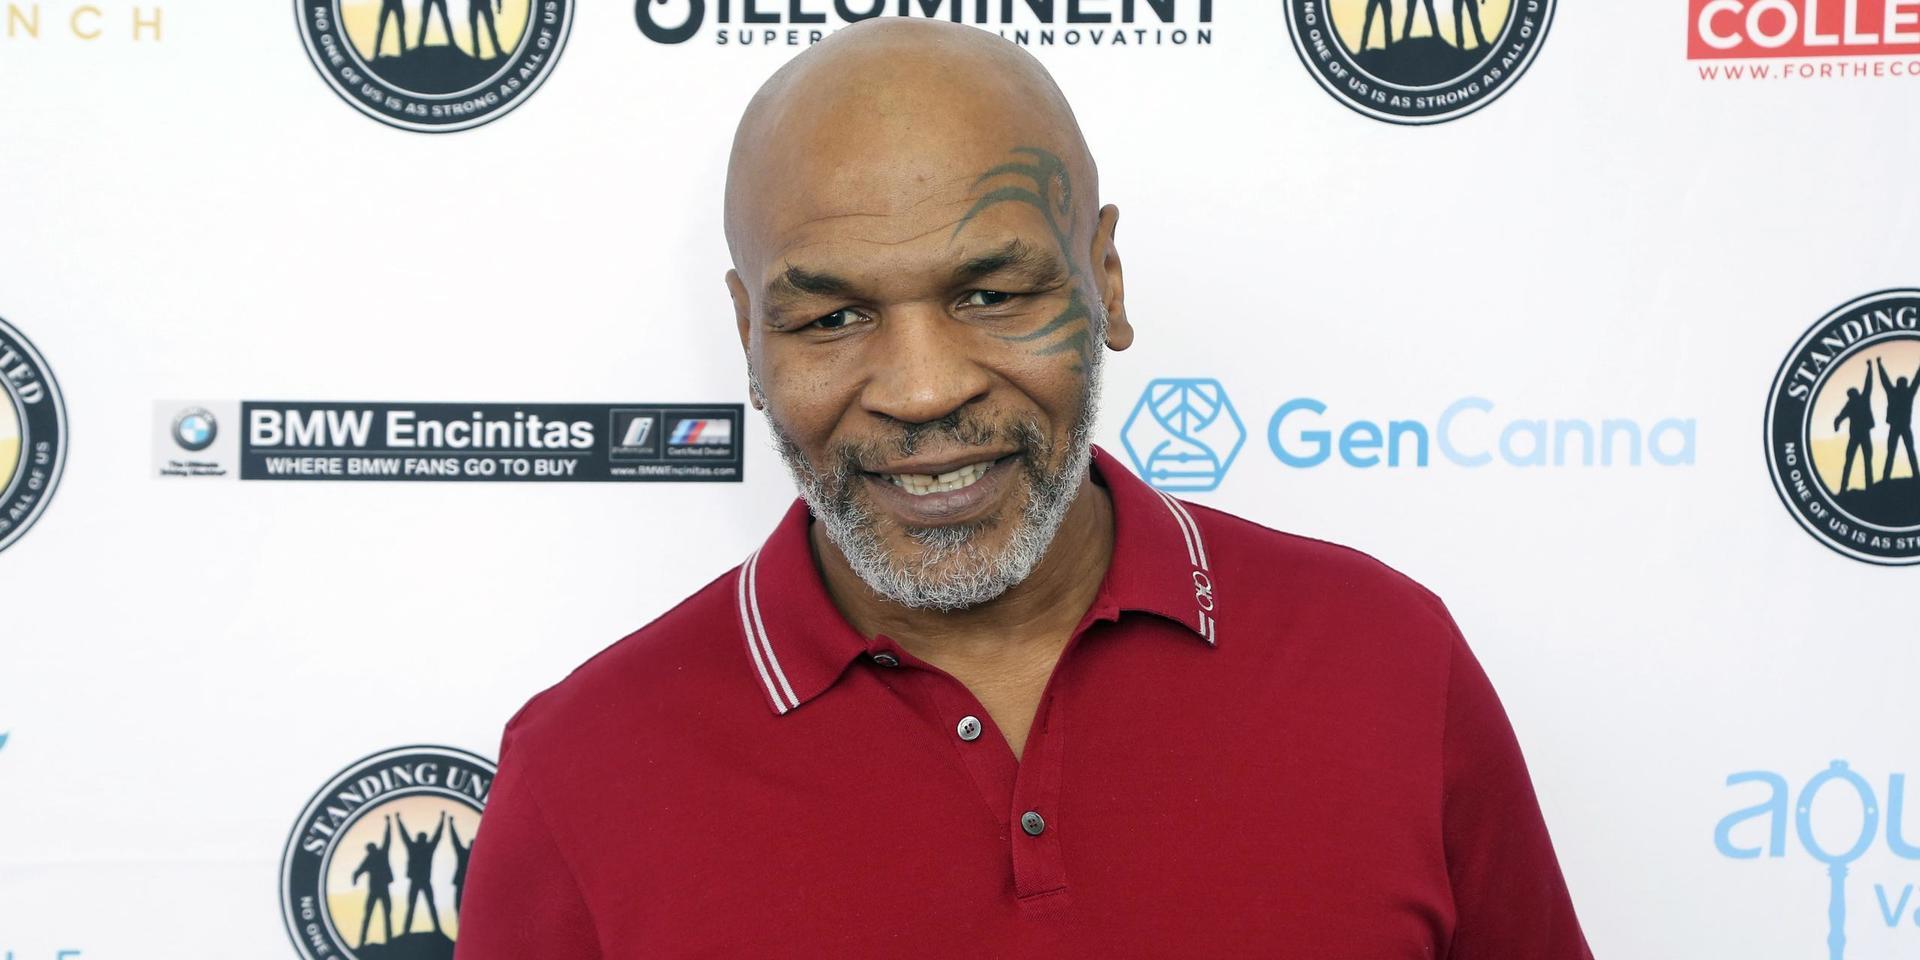 Mike Tyson under 2019. Foto: Willy Sanjuan/Invision/AP, File)  NY170